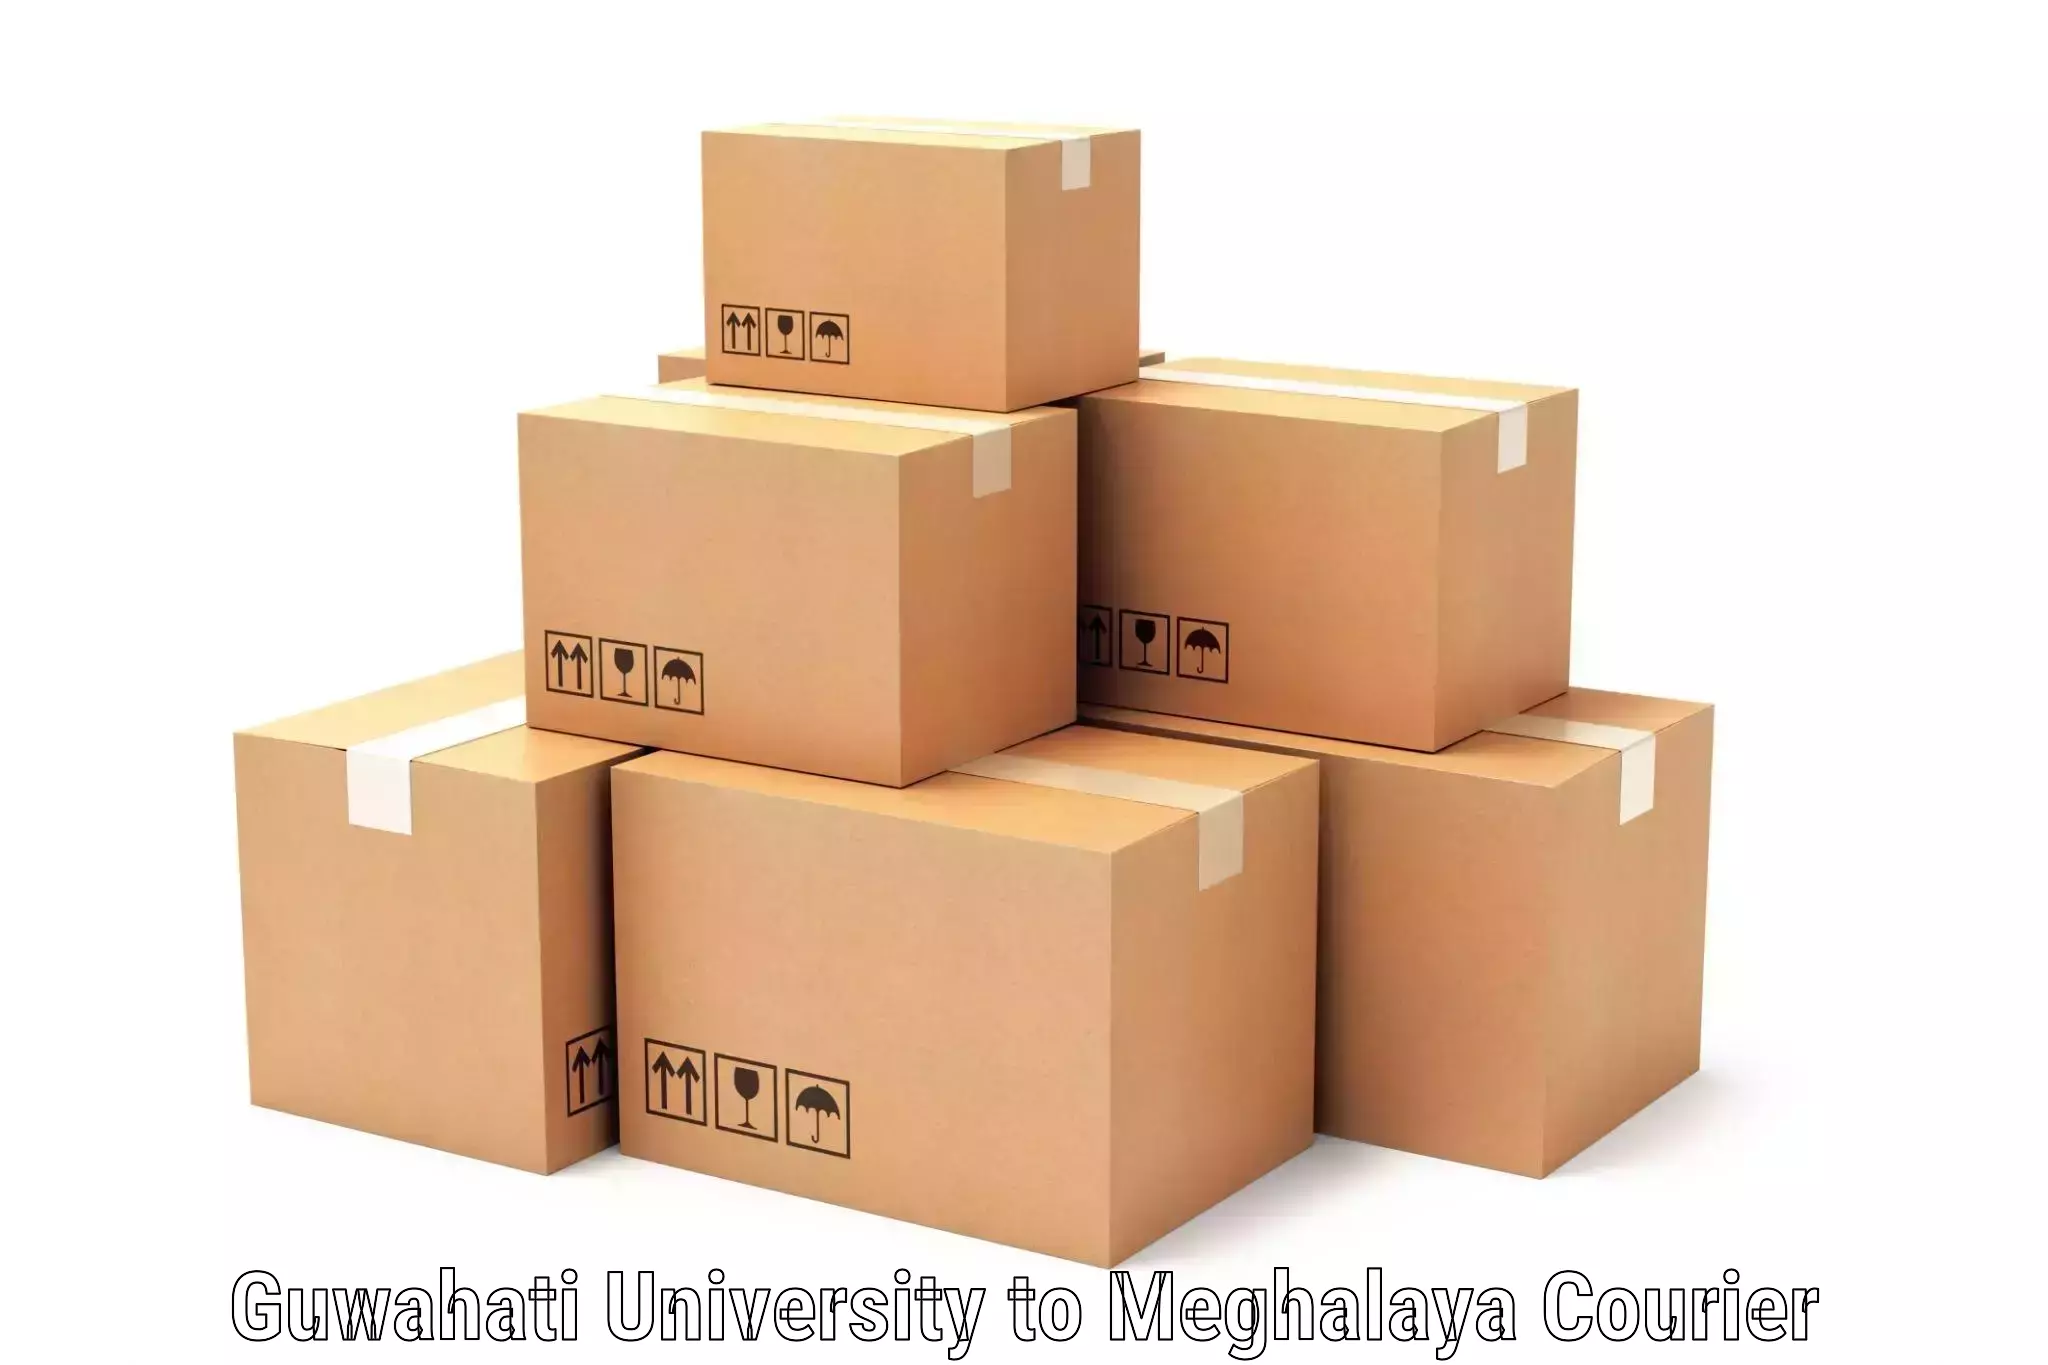 Automated parcel services Guwahati University to Nongstoin